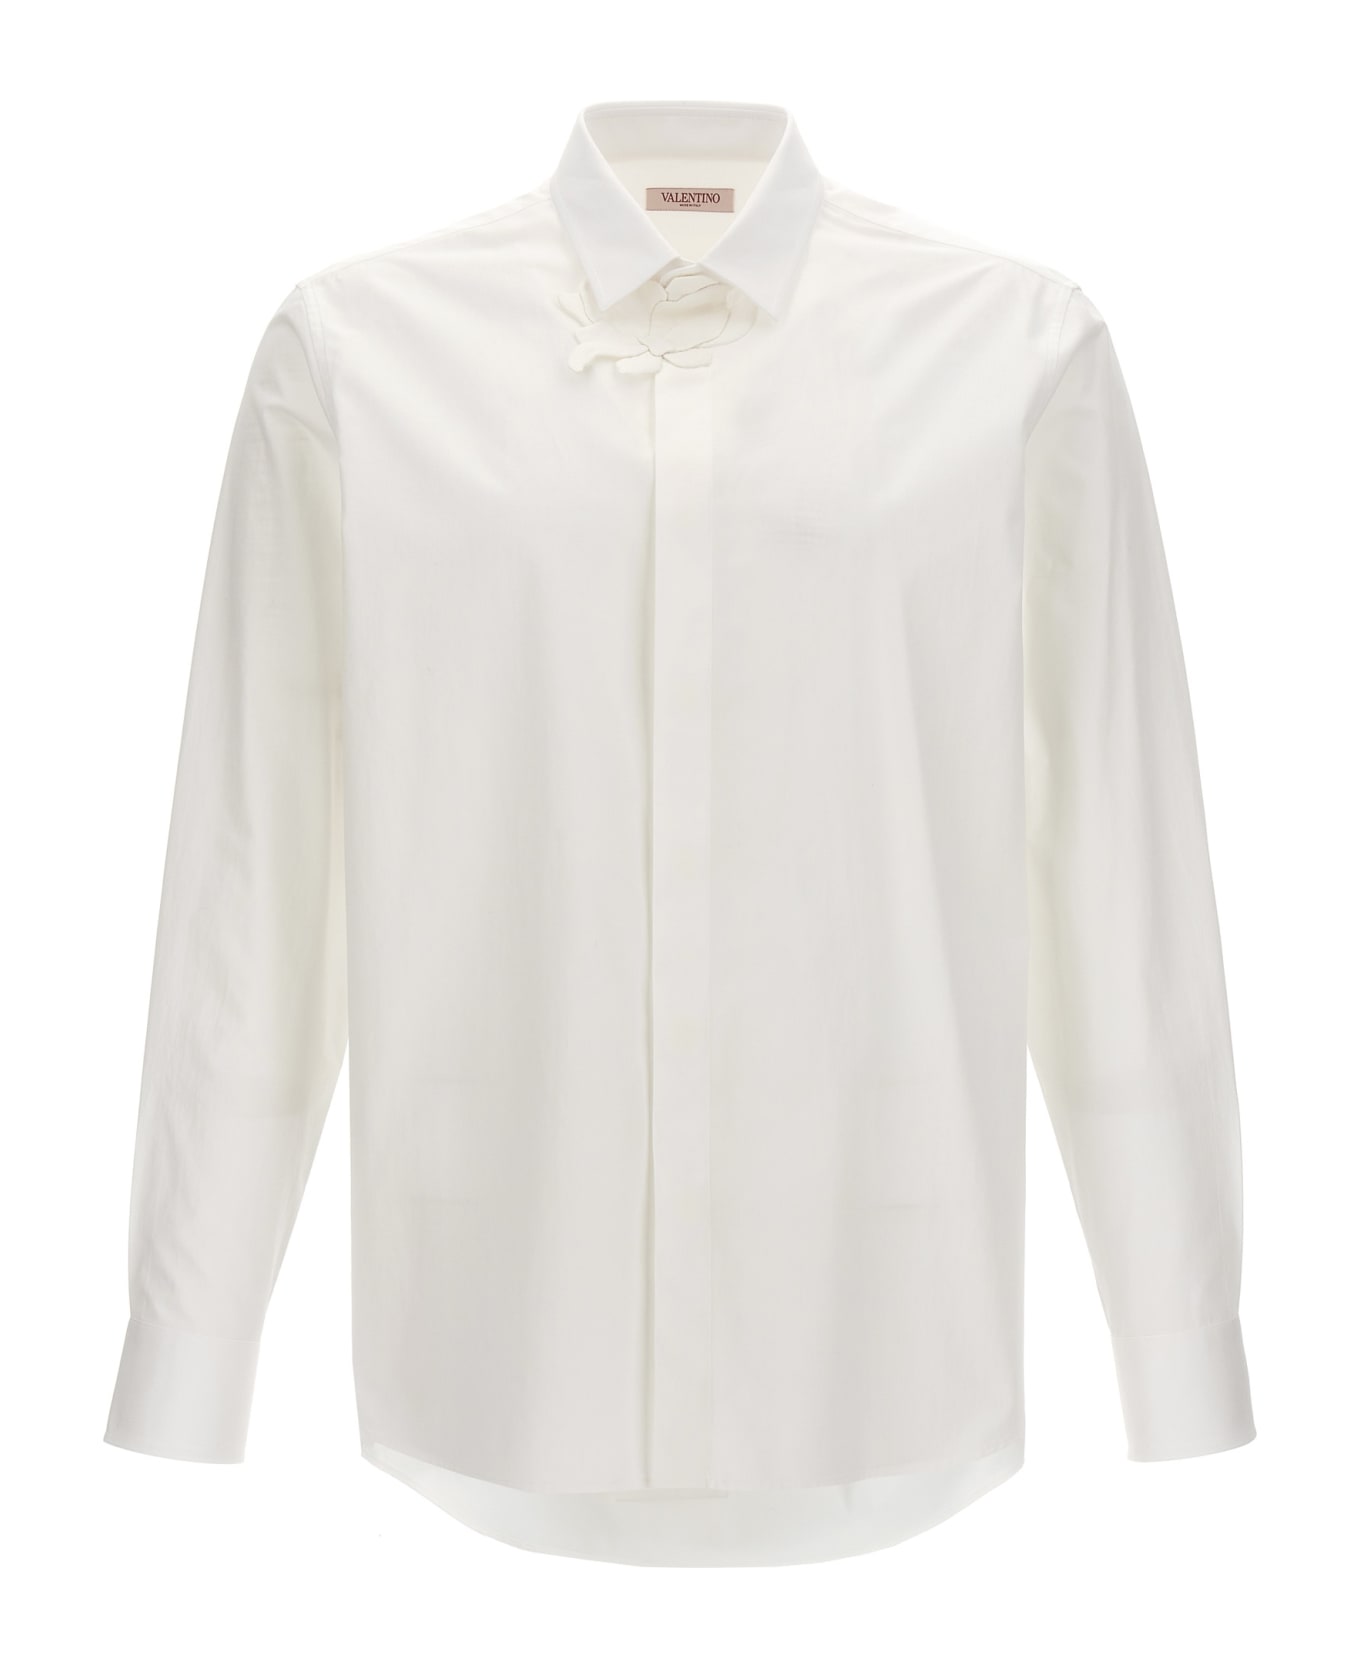 Valentino Shirt With Flower Patch - White シャツ